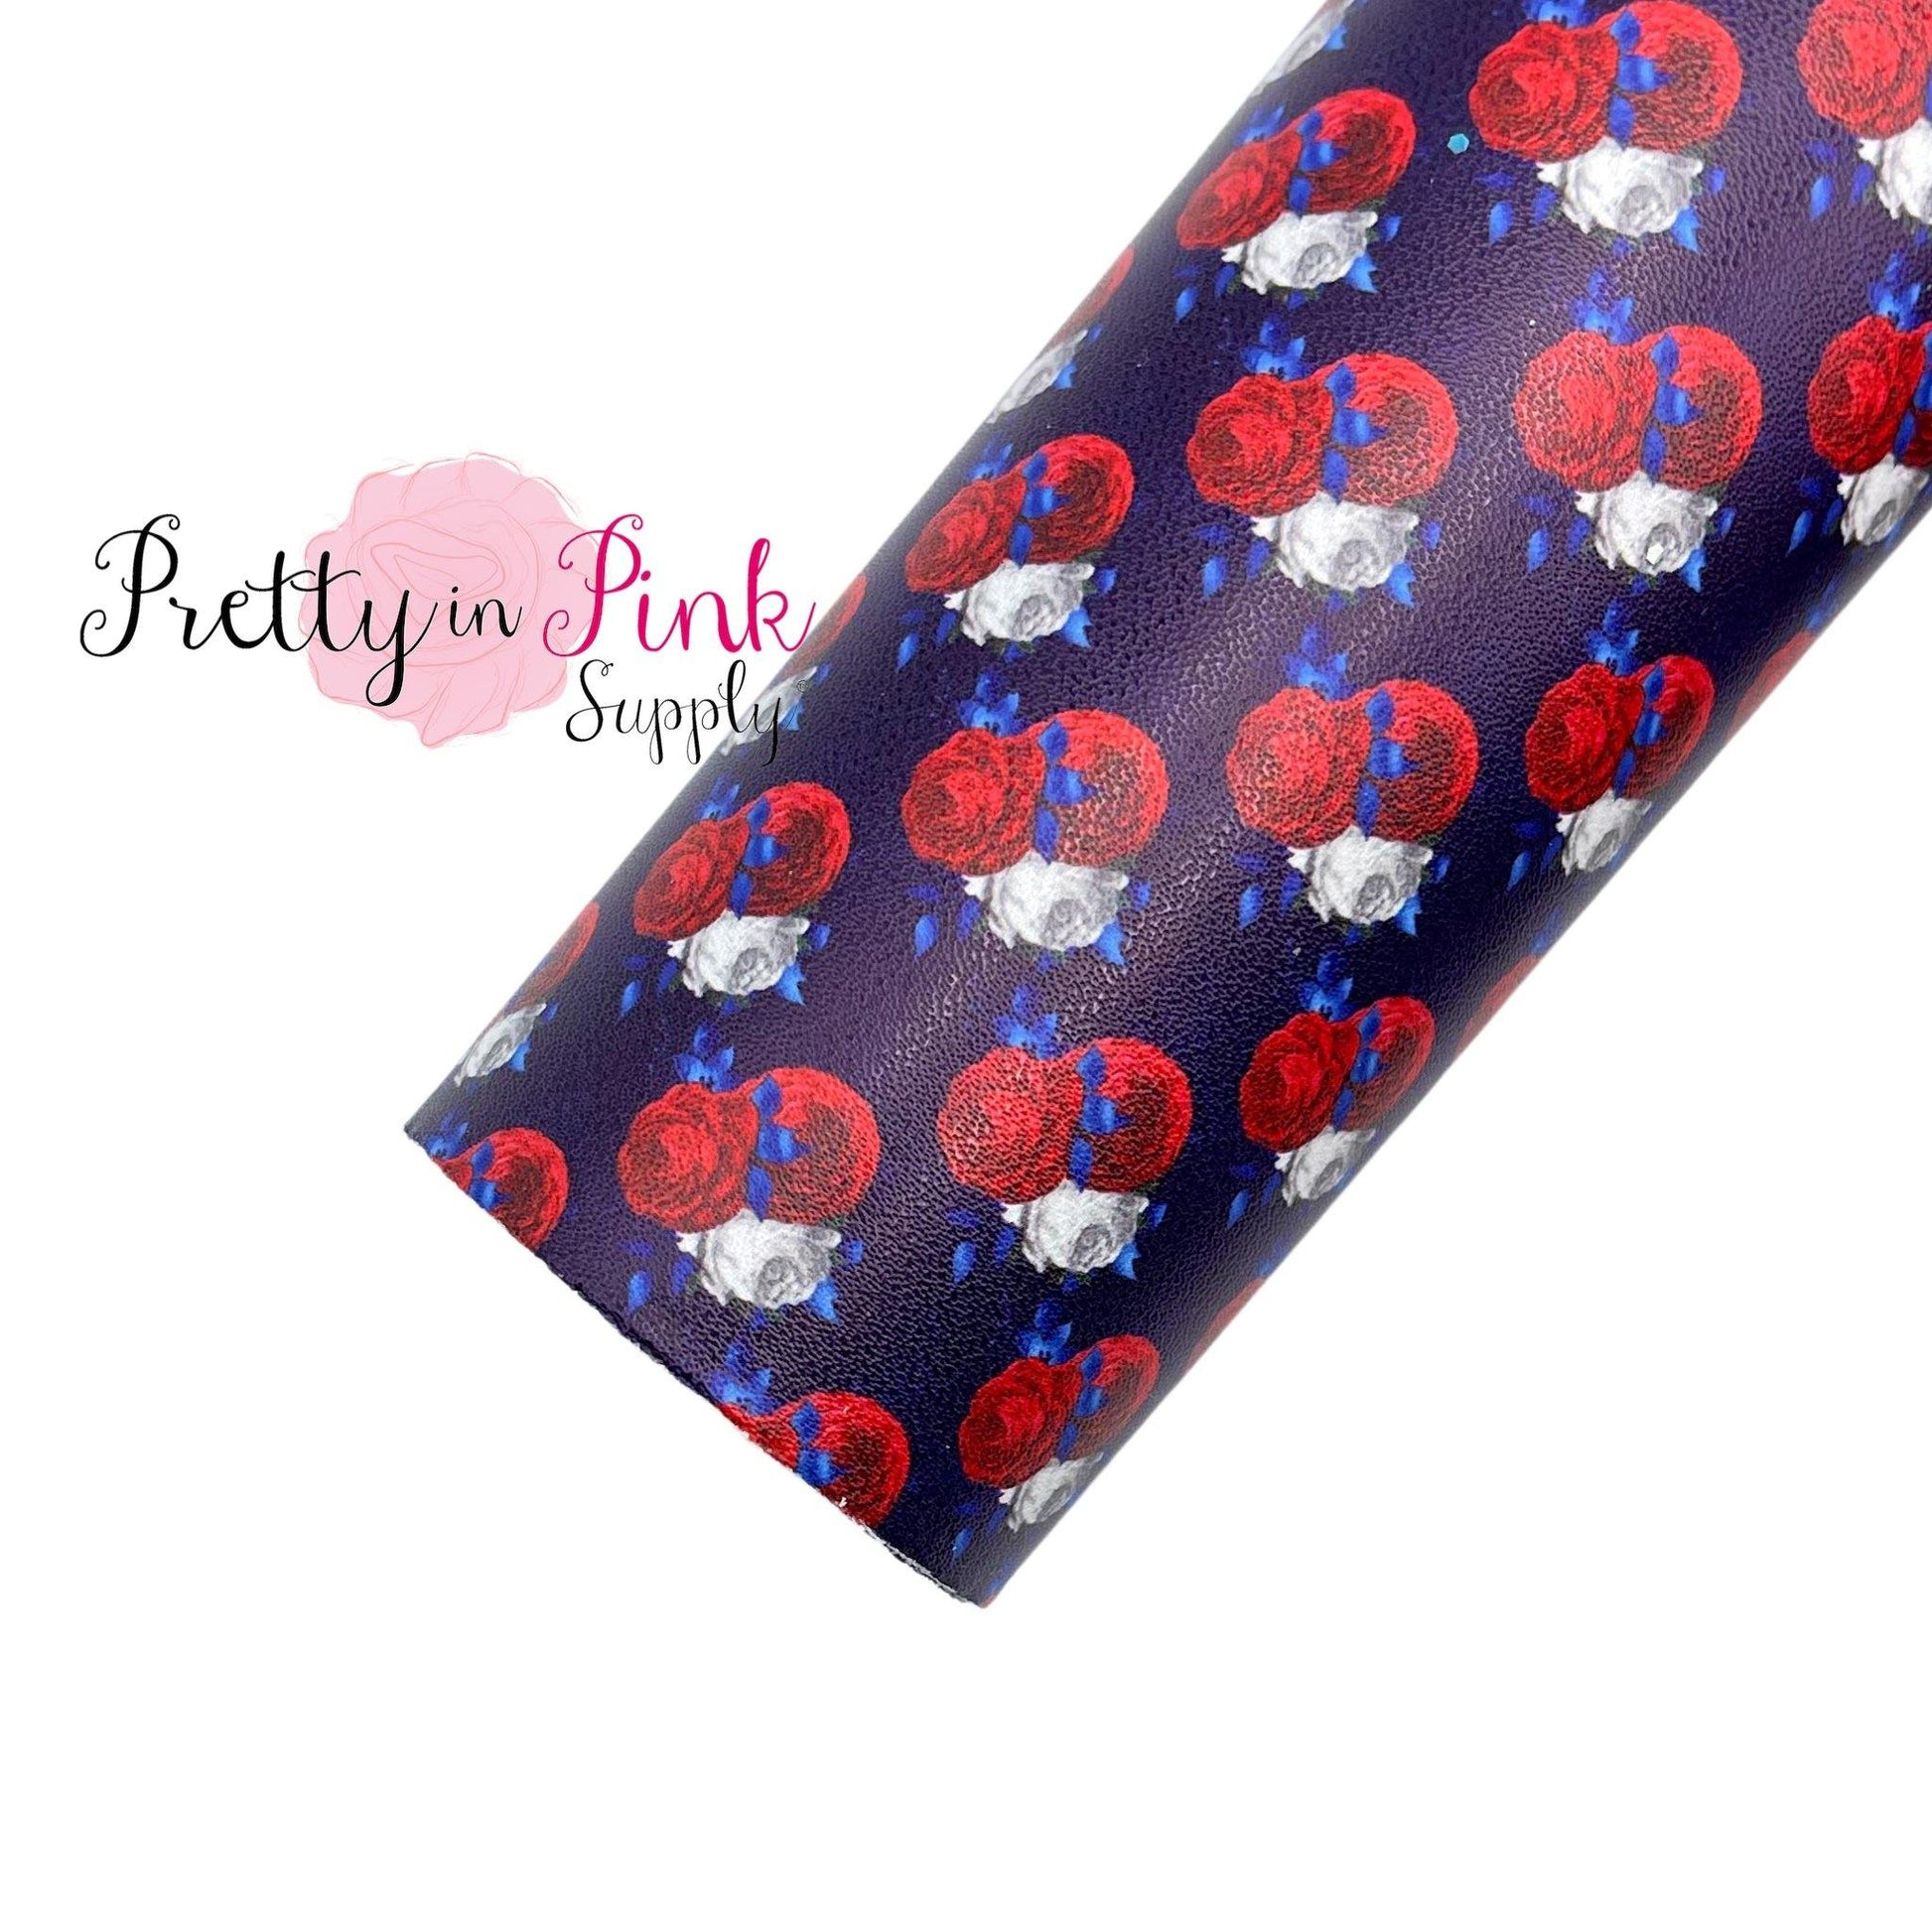 Red White Blue Floral | Faux Leather Fabric Sheet - Pretty in Pink Supply